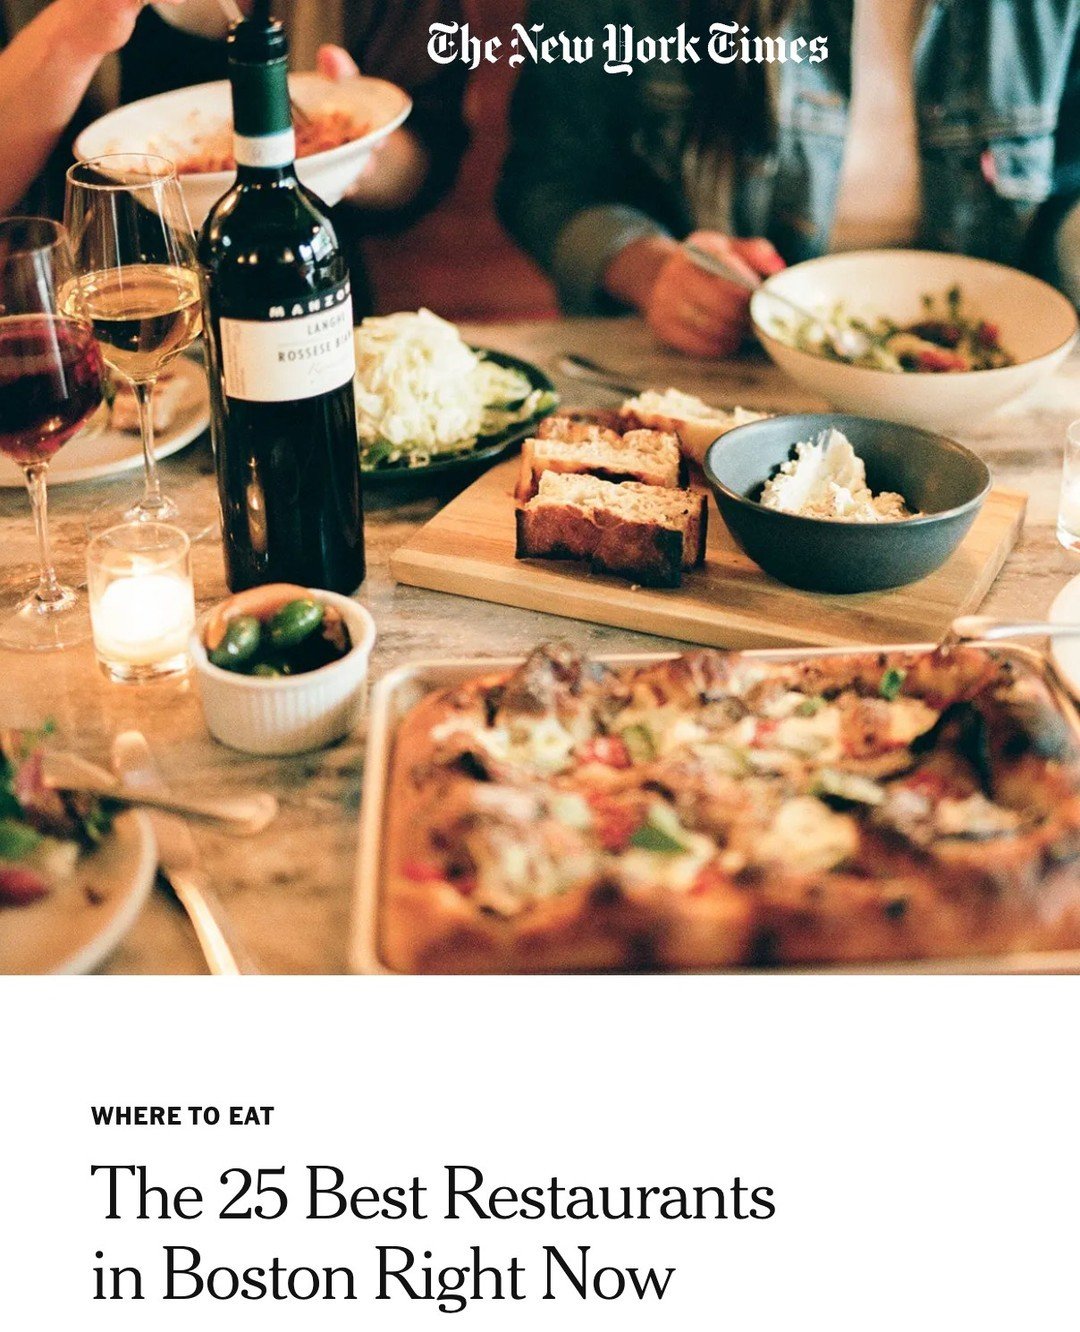 Congratulations to our restaurant partners included in &quot;The 25 Best Restaurants in Boston Right Now&quot; by the New York Times. Well deserved recognition that shows the depth and diversity of Boston's culinary scene!⁠
⁠
Bar Vlaha⁠
Field and Vin